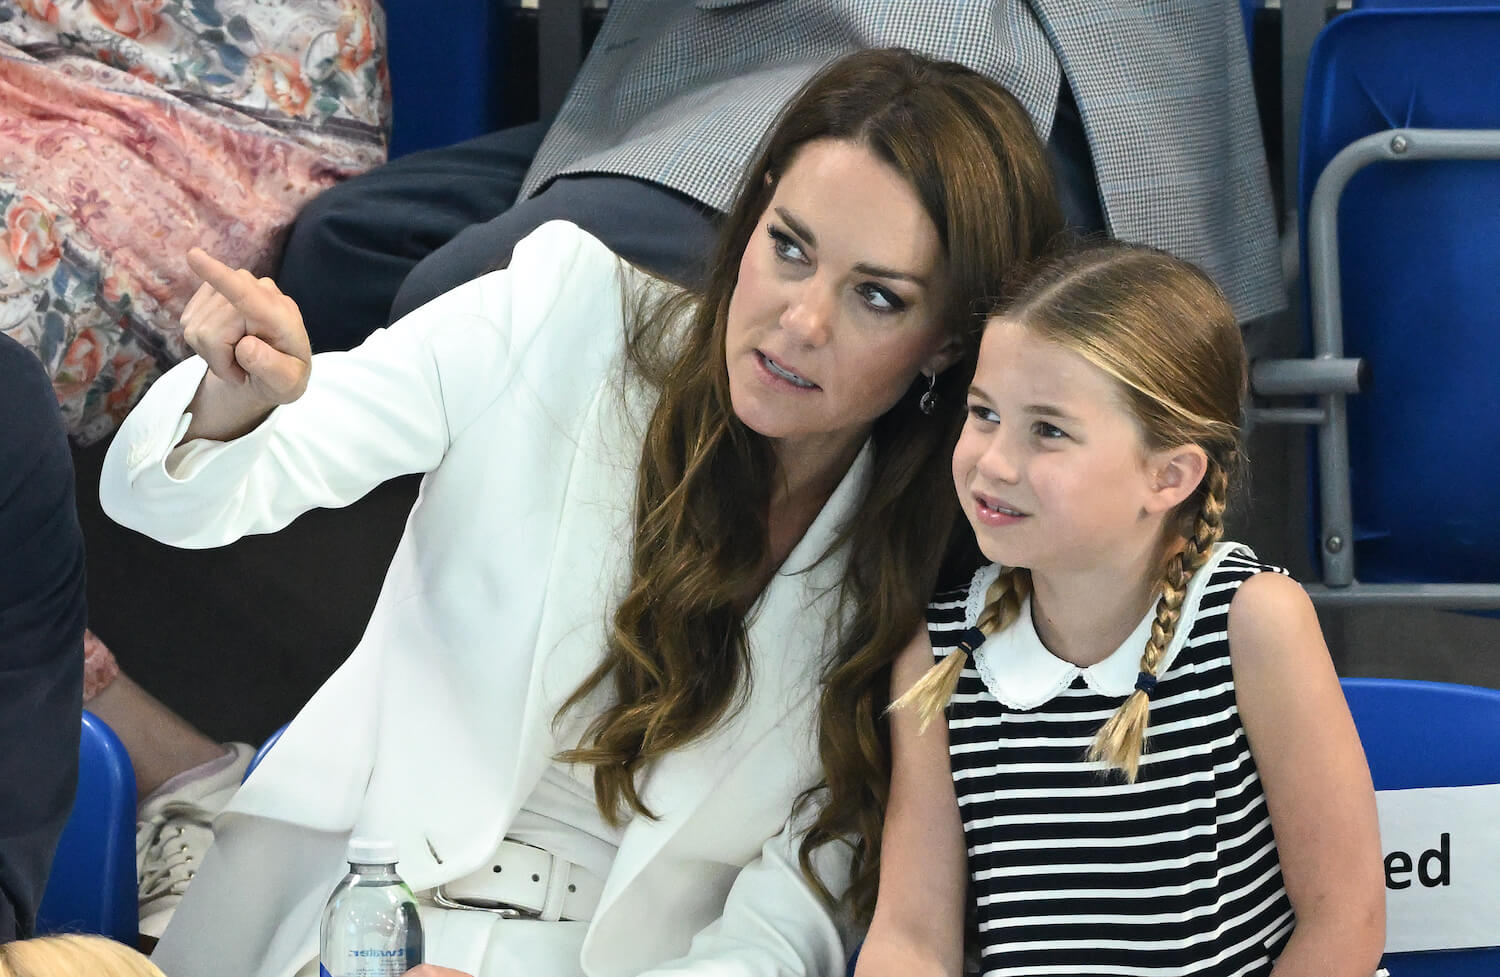 Kate Middleton wears a white jacket and points while talking to her daughter Princess Charlotte who smiles wearing black and white striped dress